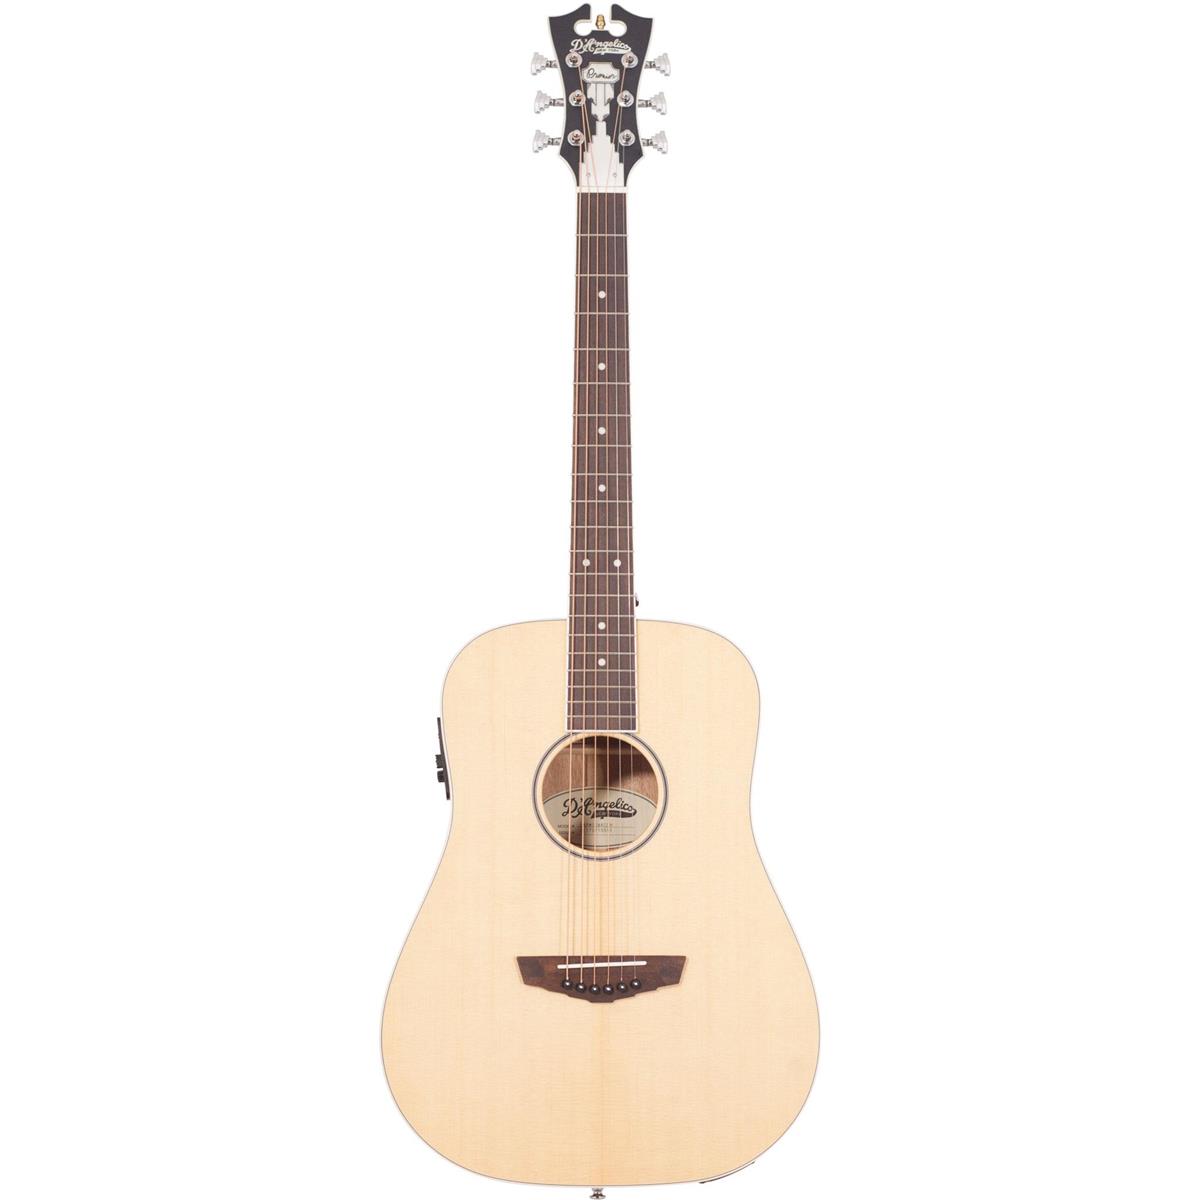 Image of D'Angelico Guitars Premier Niagara Acoustic Electric Guitar